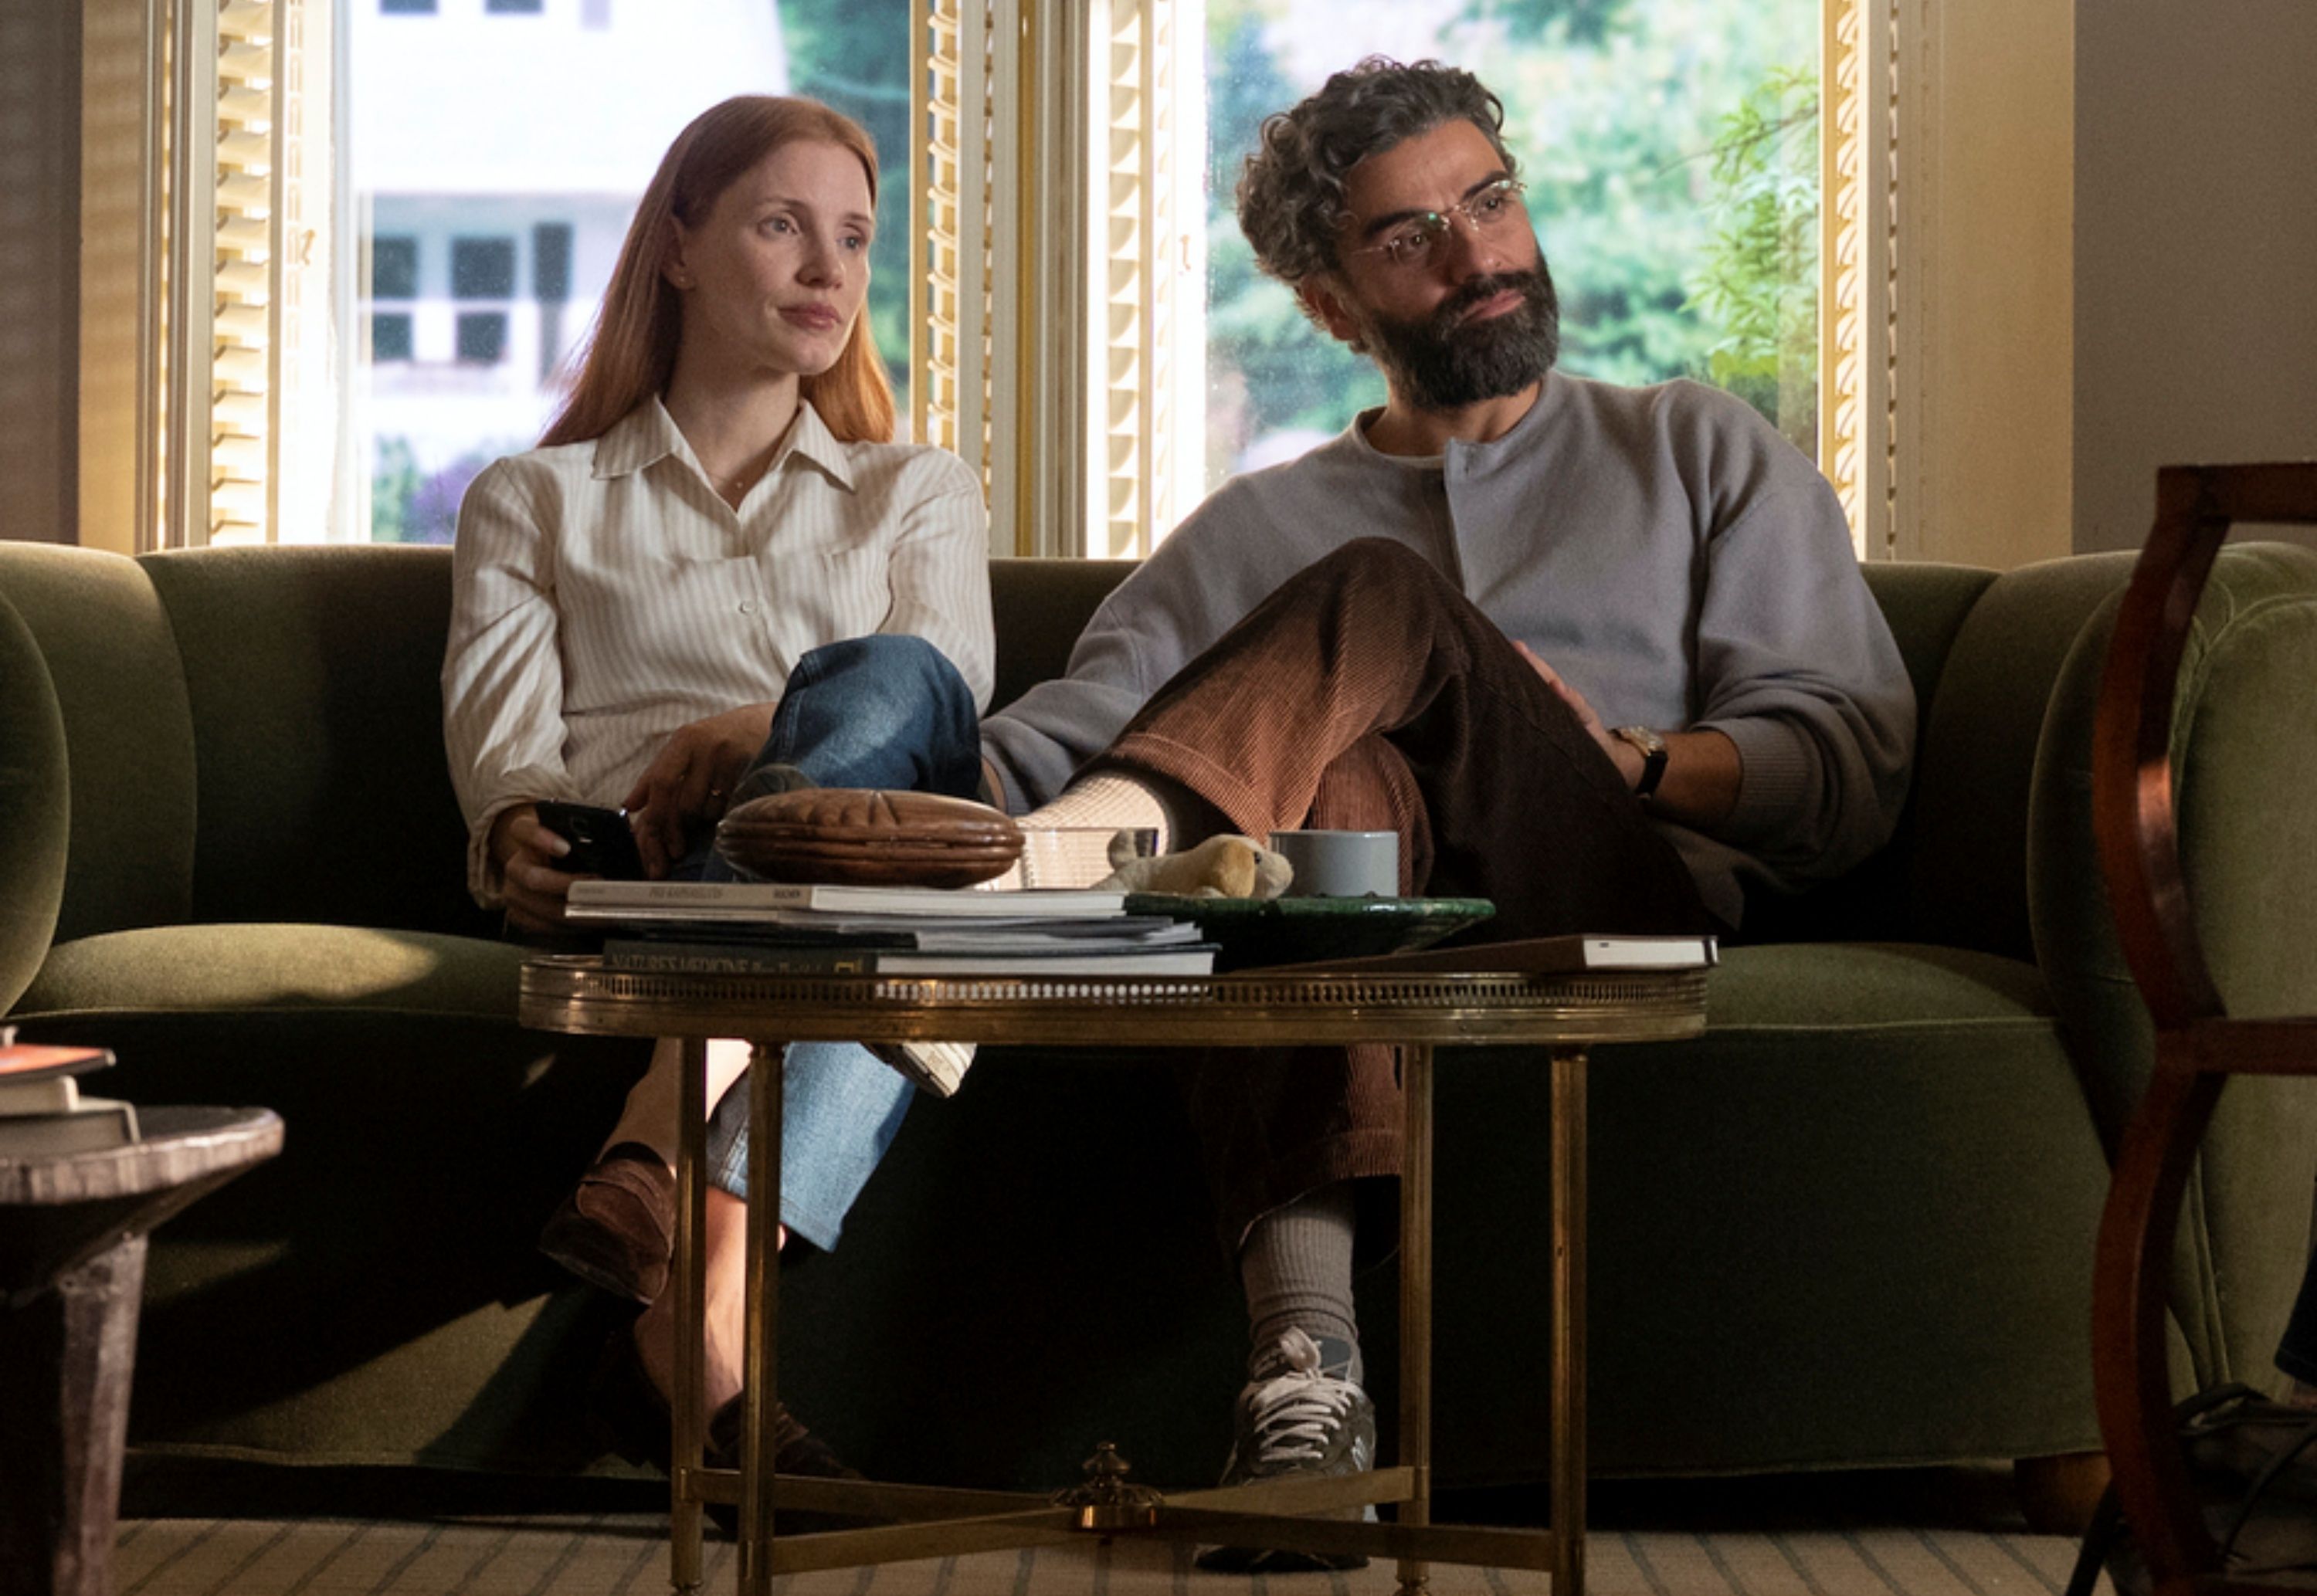 scenes-from-a-marriage-jessica-chastain-oscar-isaac-03